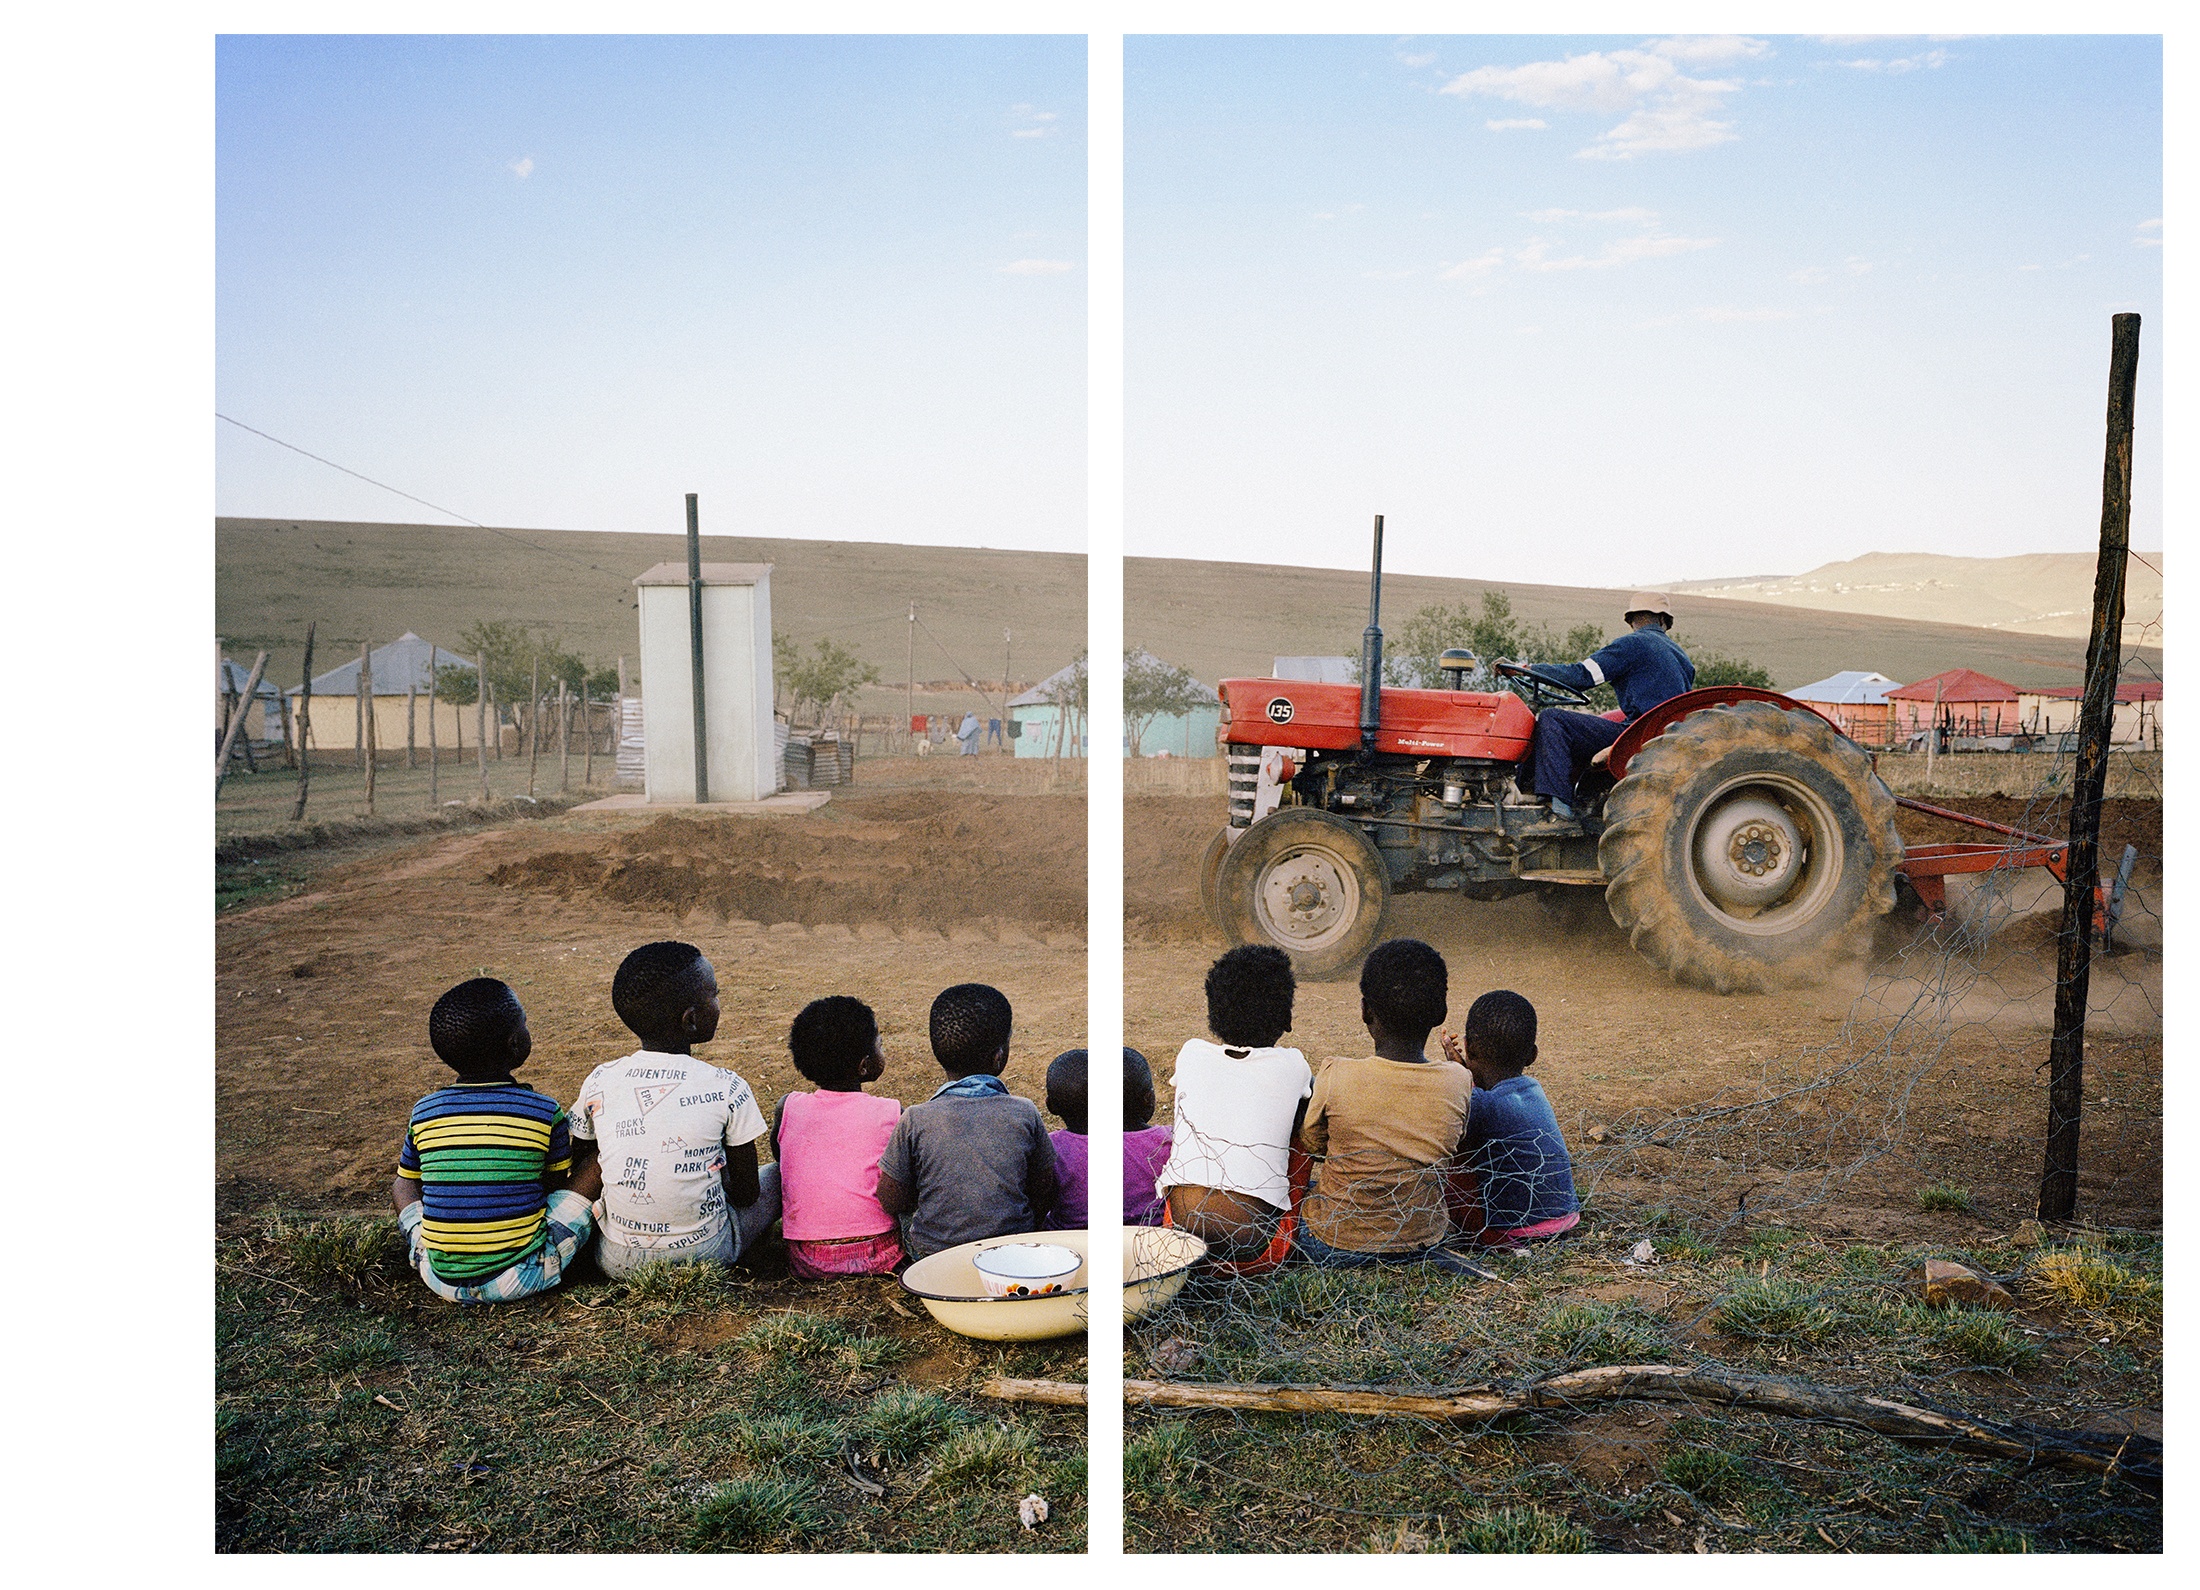 Lindokuhle Sobekwa's photograph 'Kwa MamThembu' shows a group of children sitting in a row at the front, looking at an individual operating a tractor and plow at the back.
